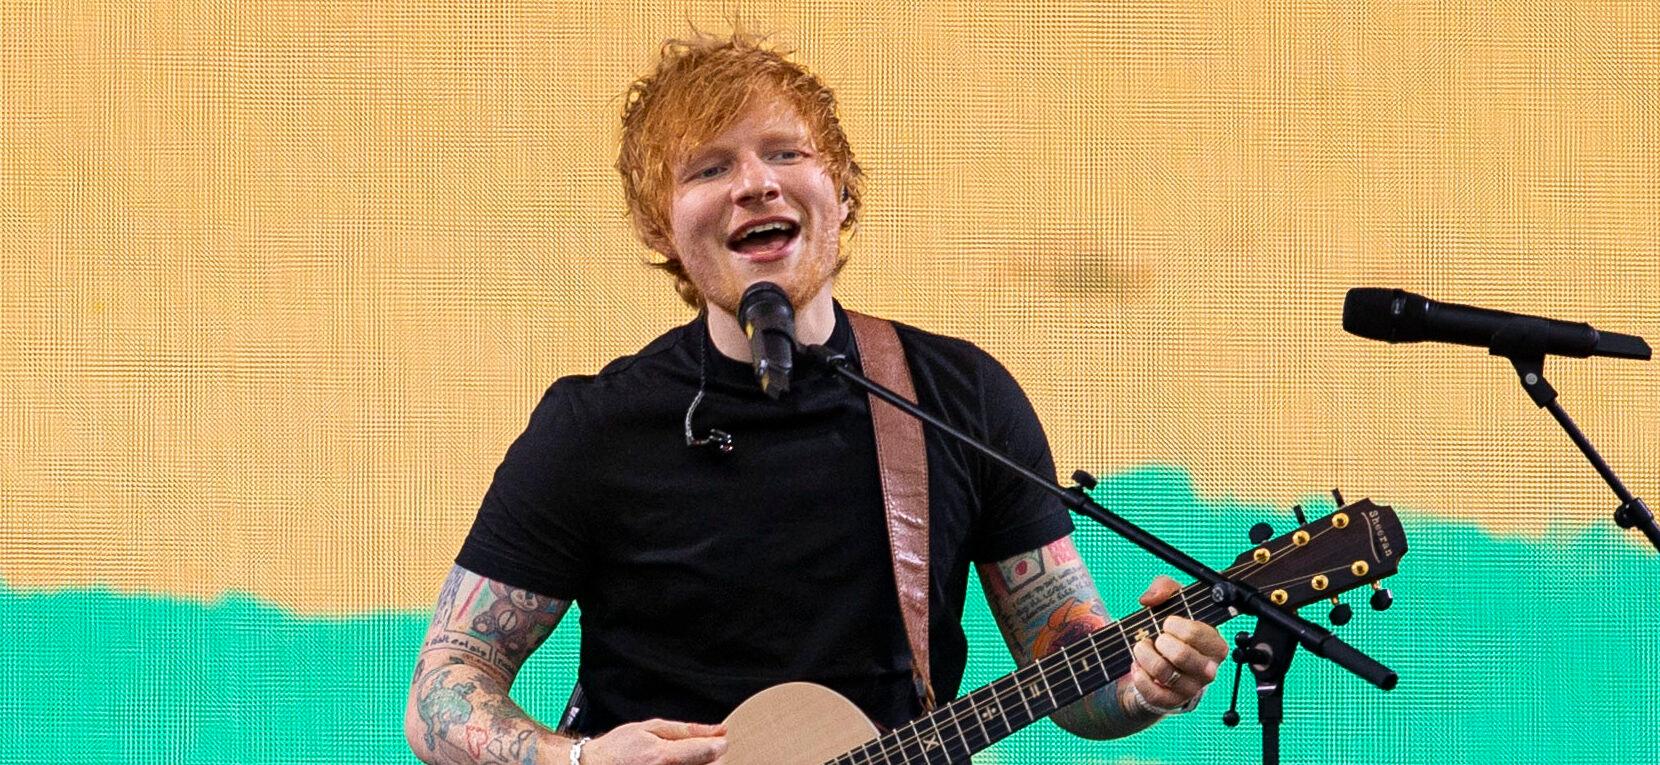 Ed Sheeran Wins Second Lawsuit Over ‘Thinking Out Loud’ And Marvin Gaye’s ‘Let’s Get It On’